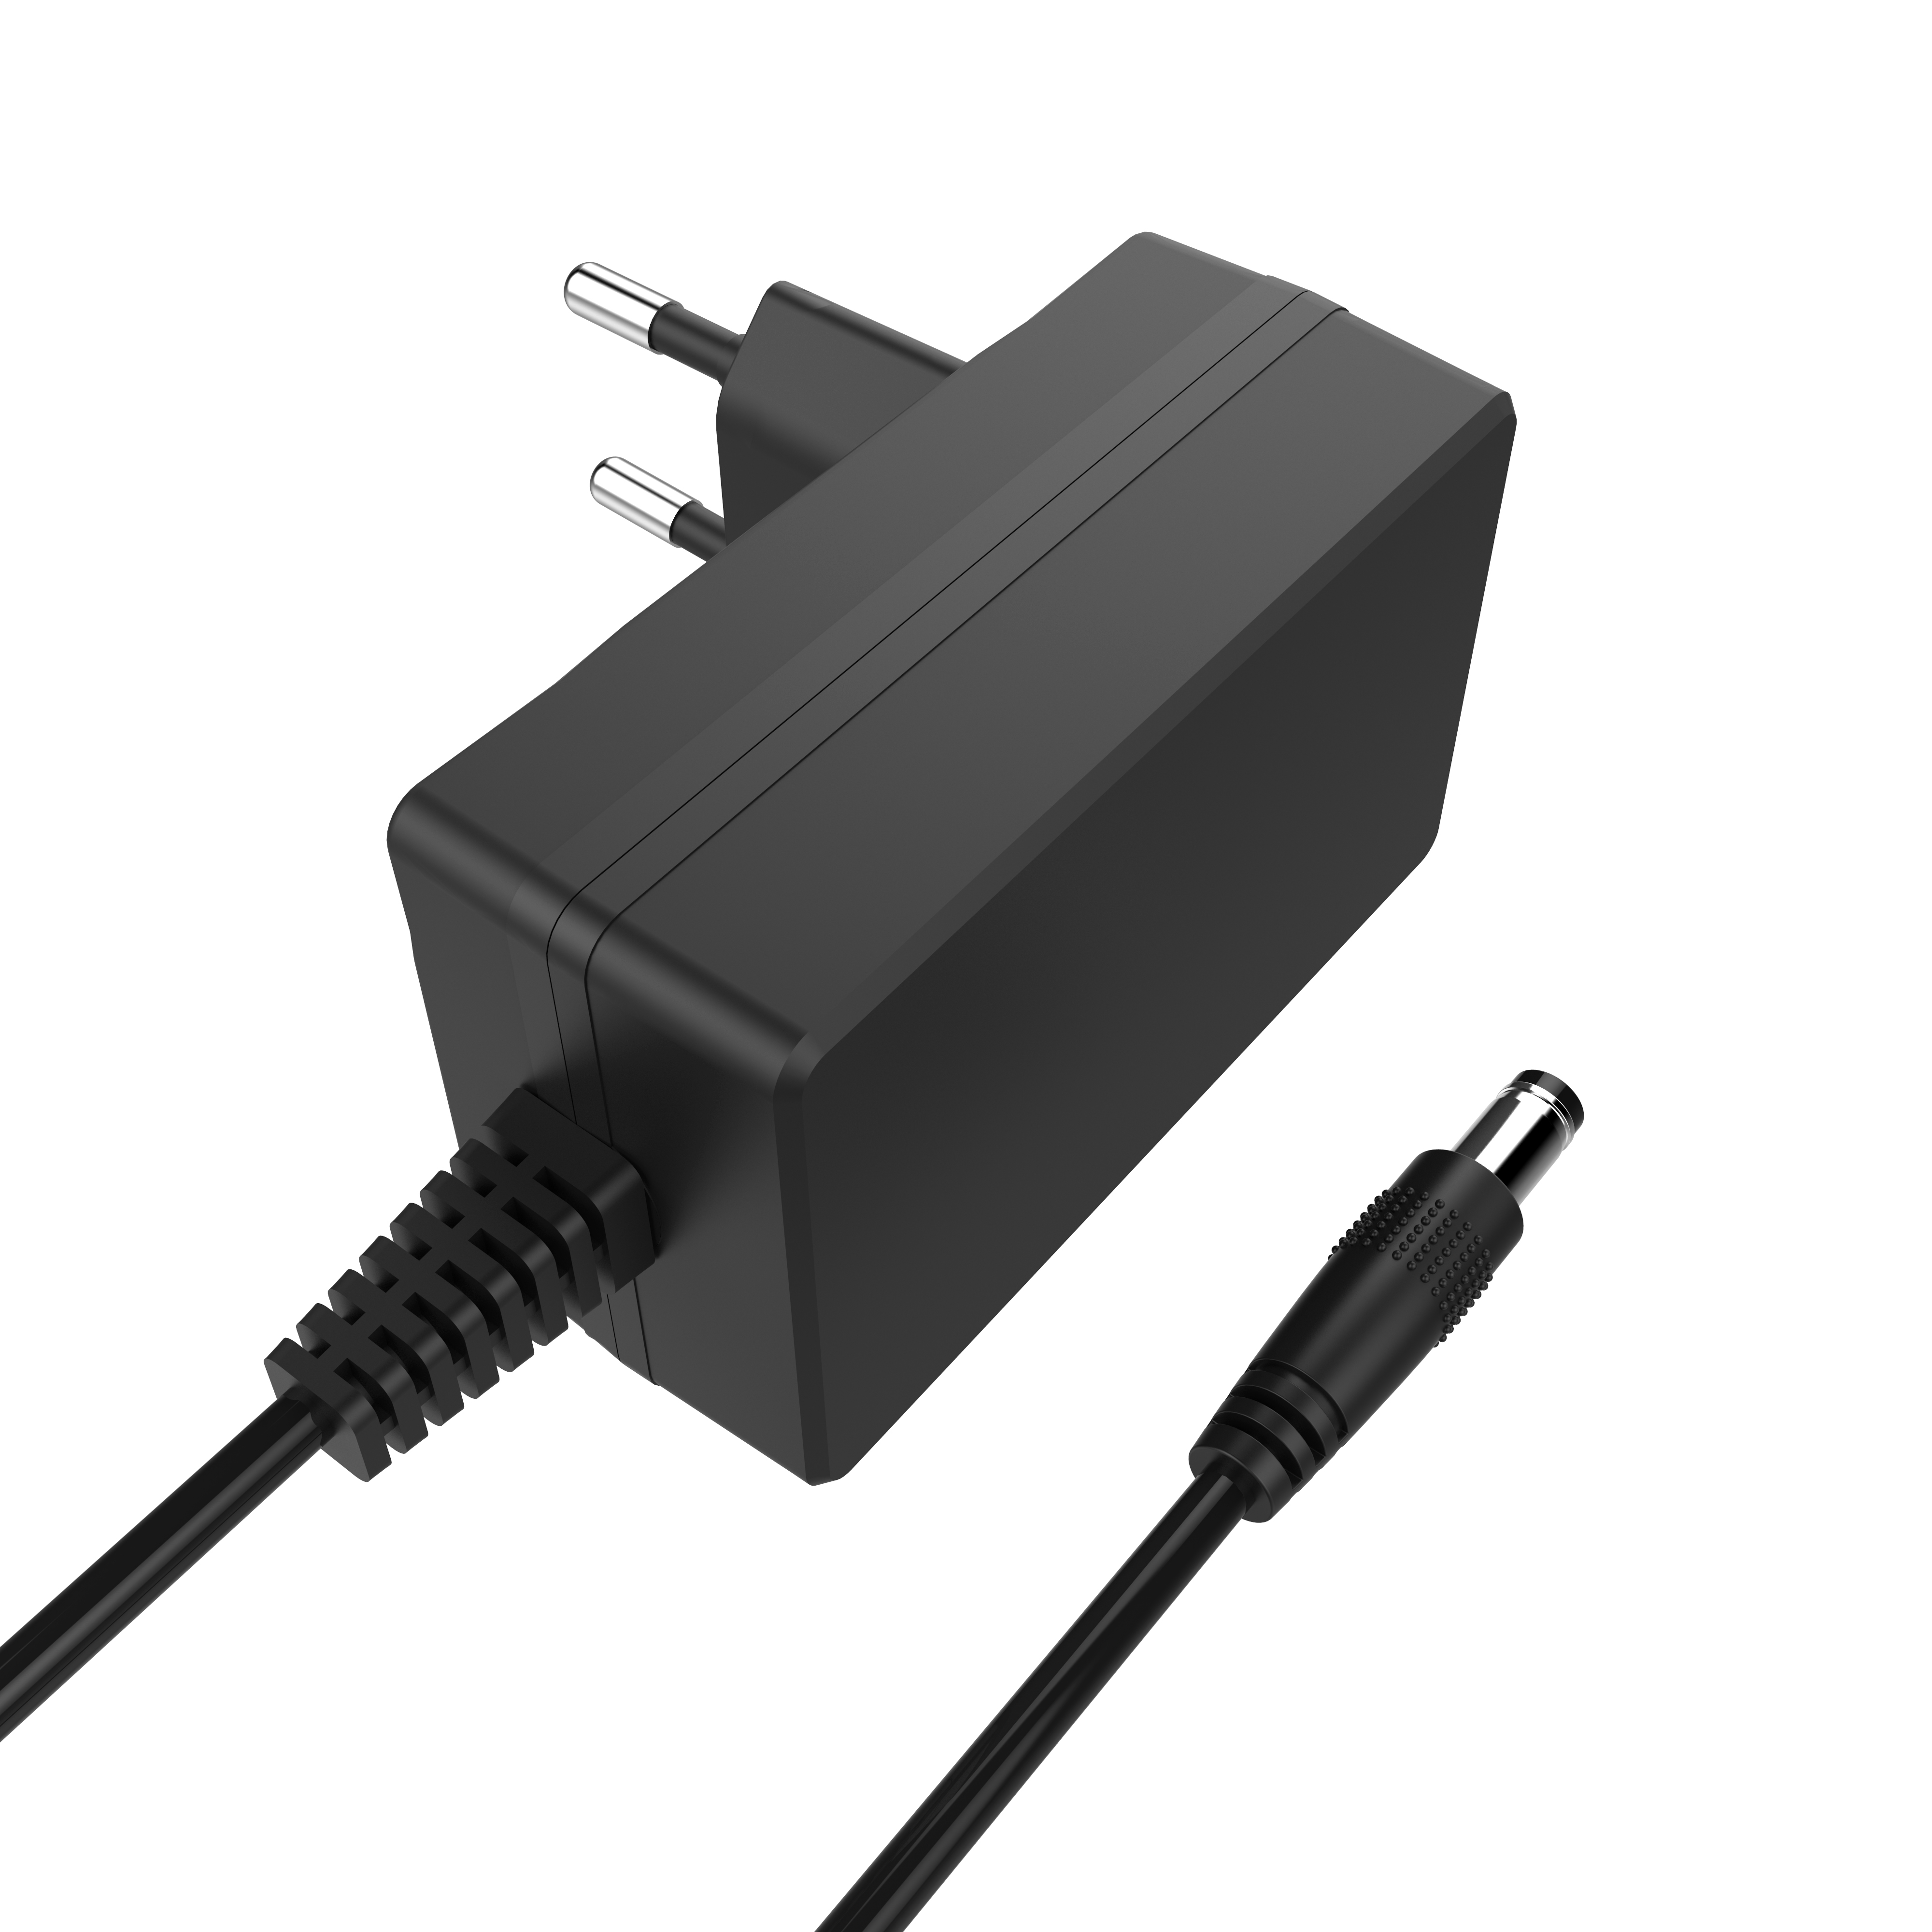 CE GS LVD EMC certificated AC DC adapter 12v 2.5a 24v 1.25a 30w wall plug adapter EN62368/61558 safety